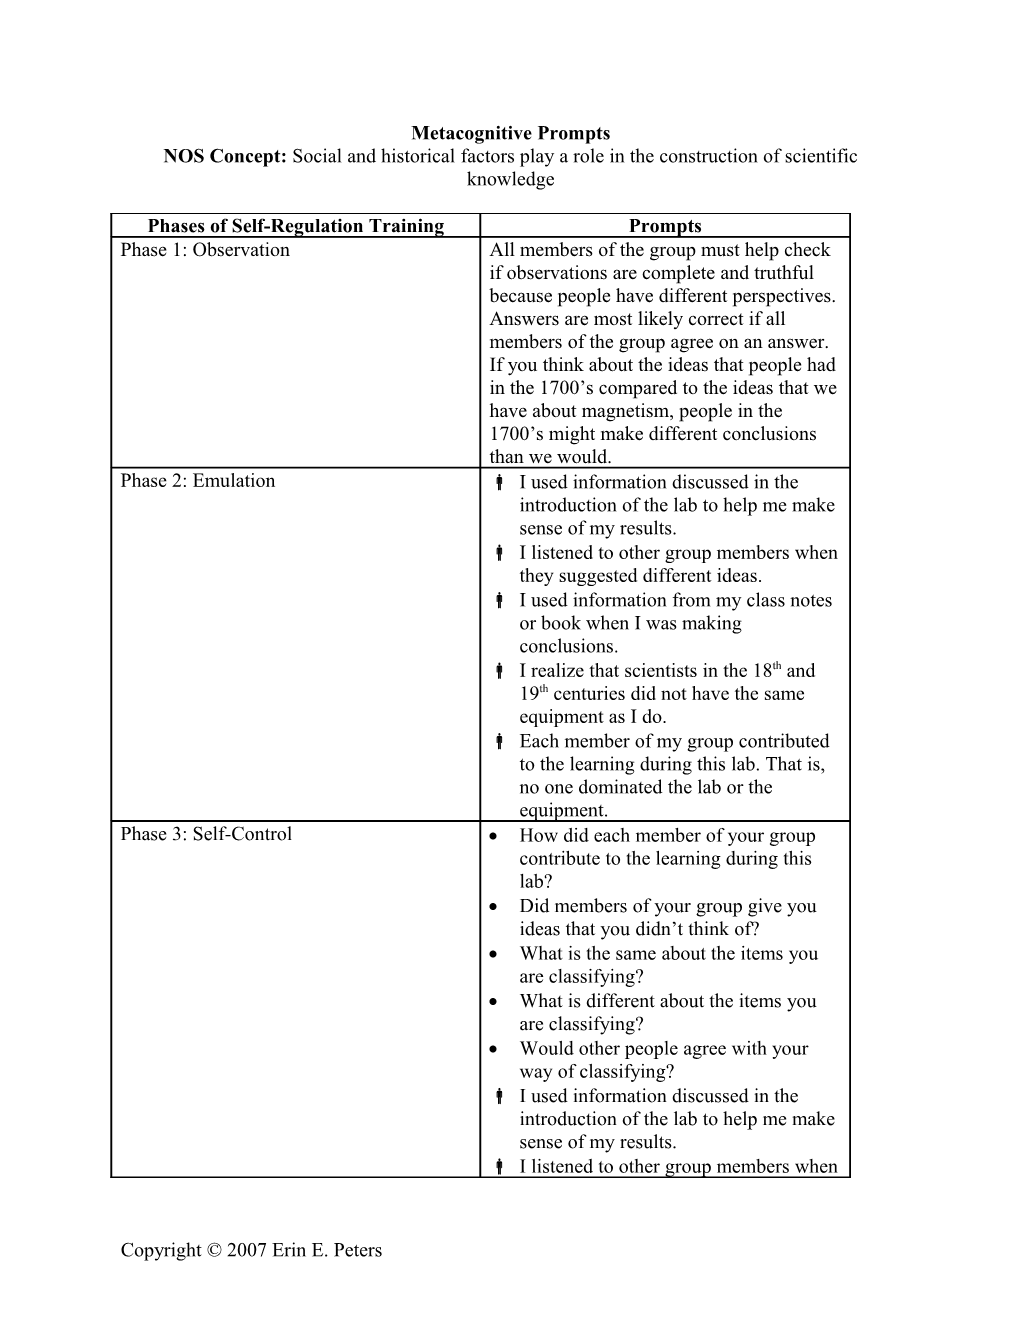 Checklists of Essential Metacognitive Processes